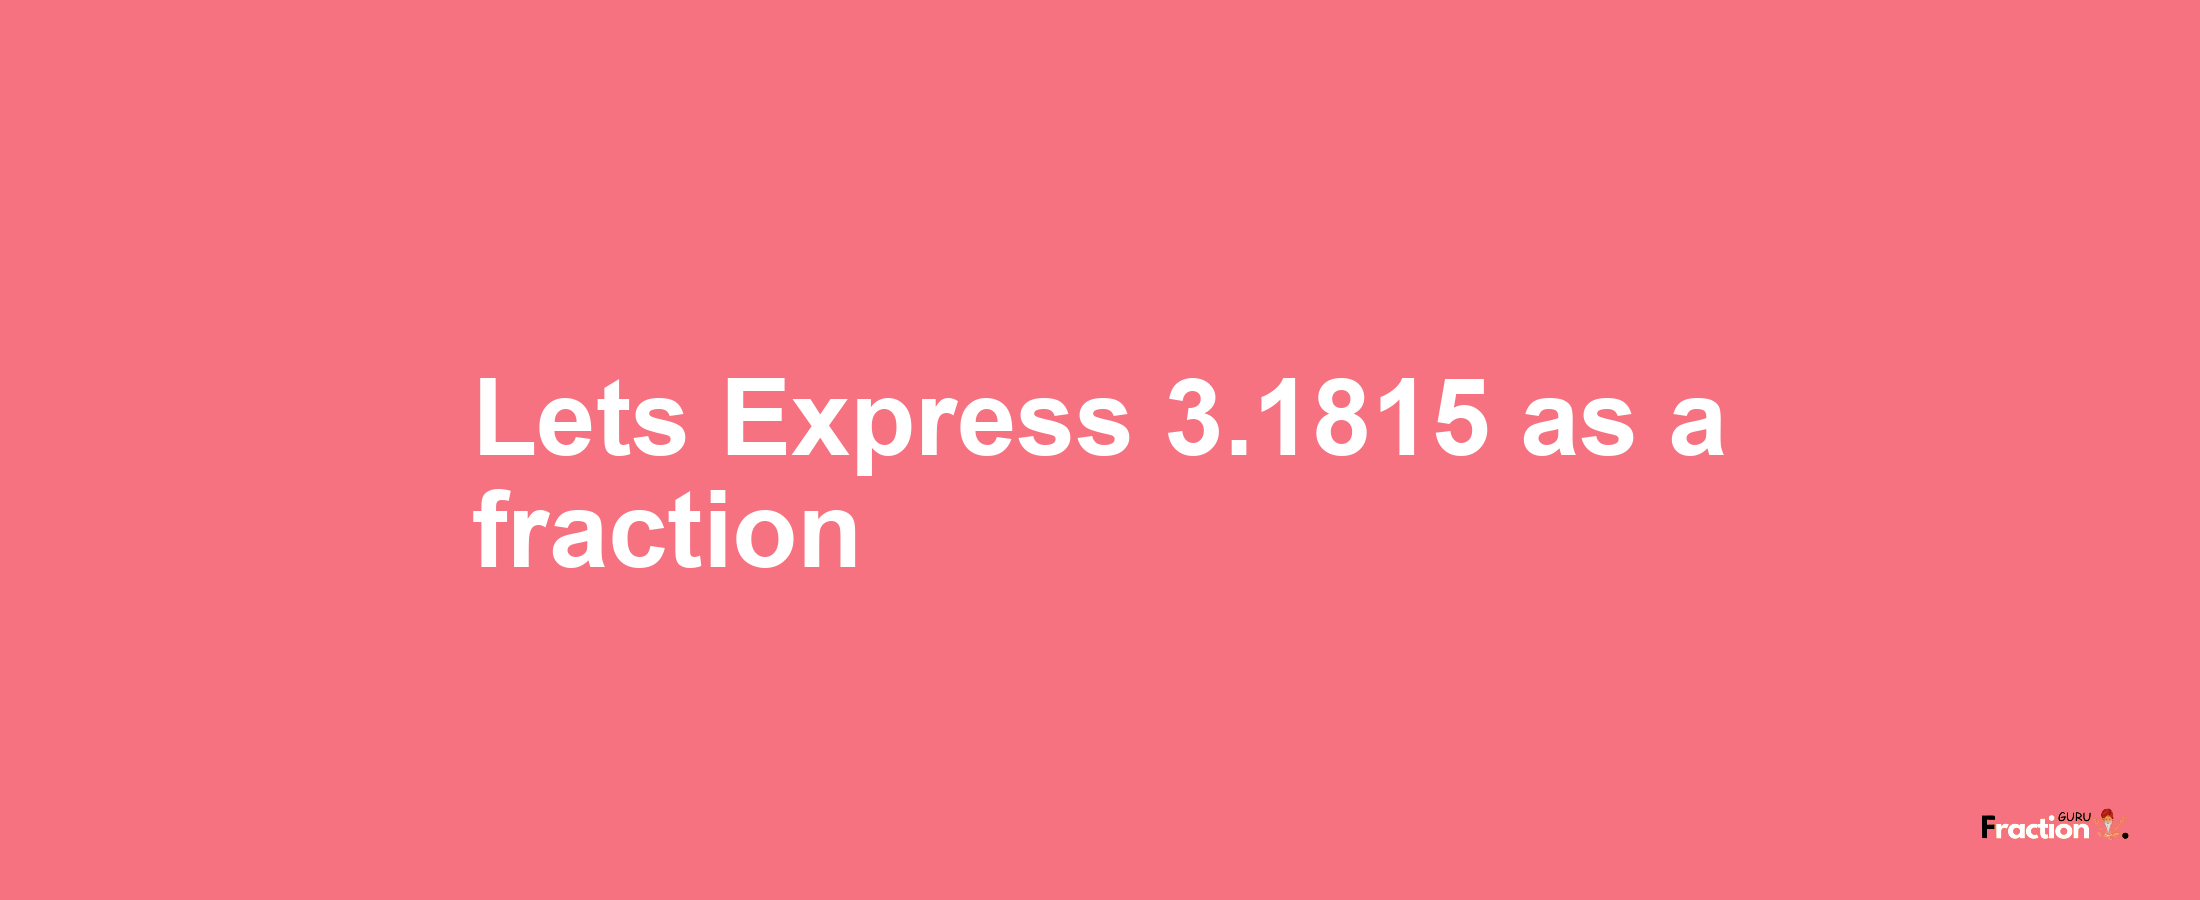 Lets Express 3.1815 as afraction